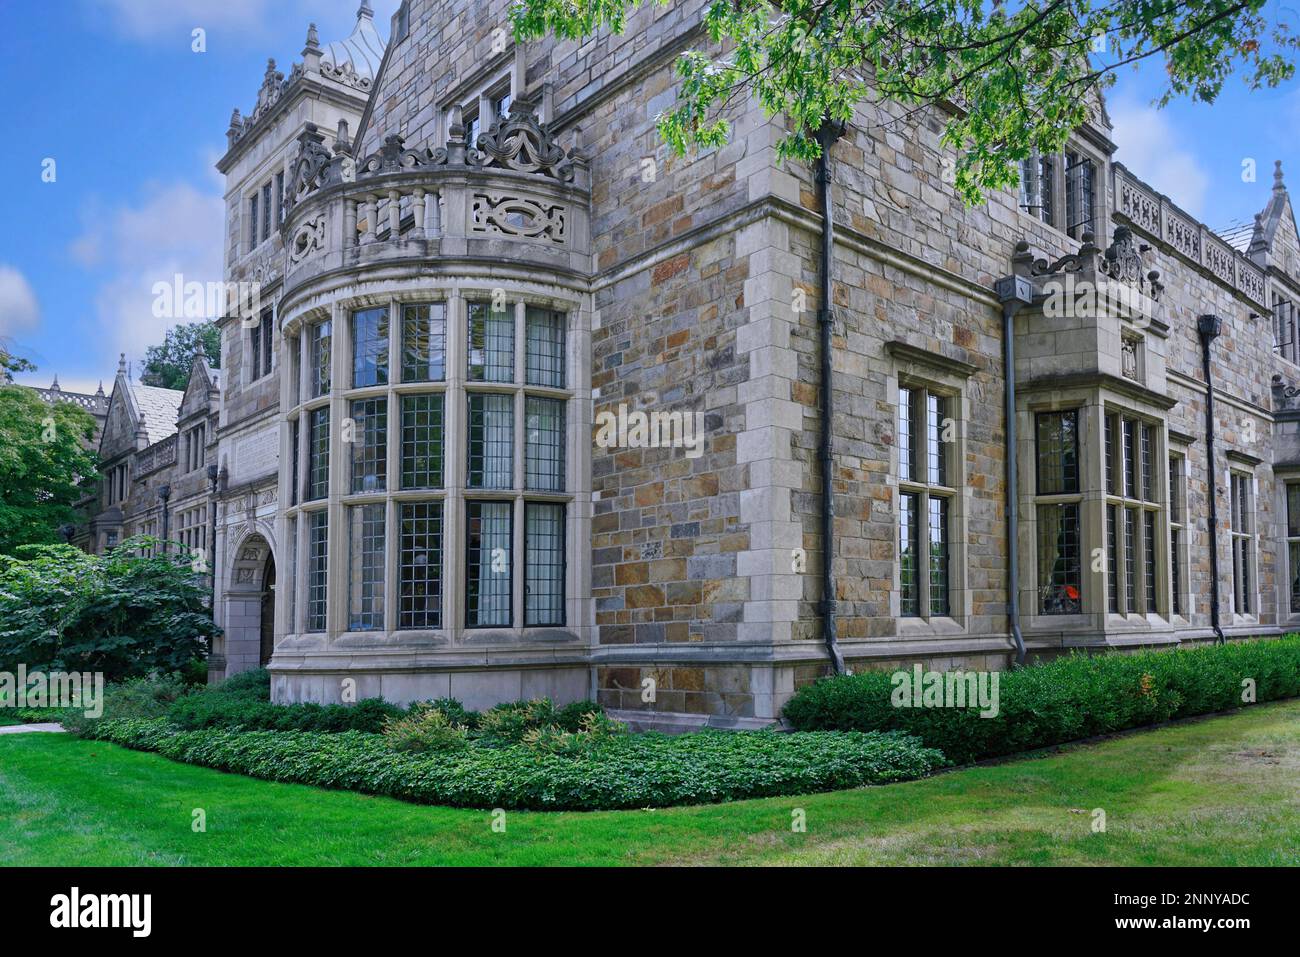 Ann Arbor, Michigan -  Campus of the University of Michigan with traditional gothic style stone buildings with gables Stock Photo